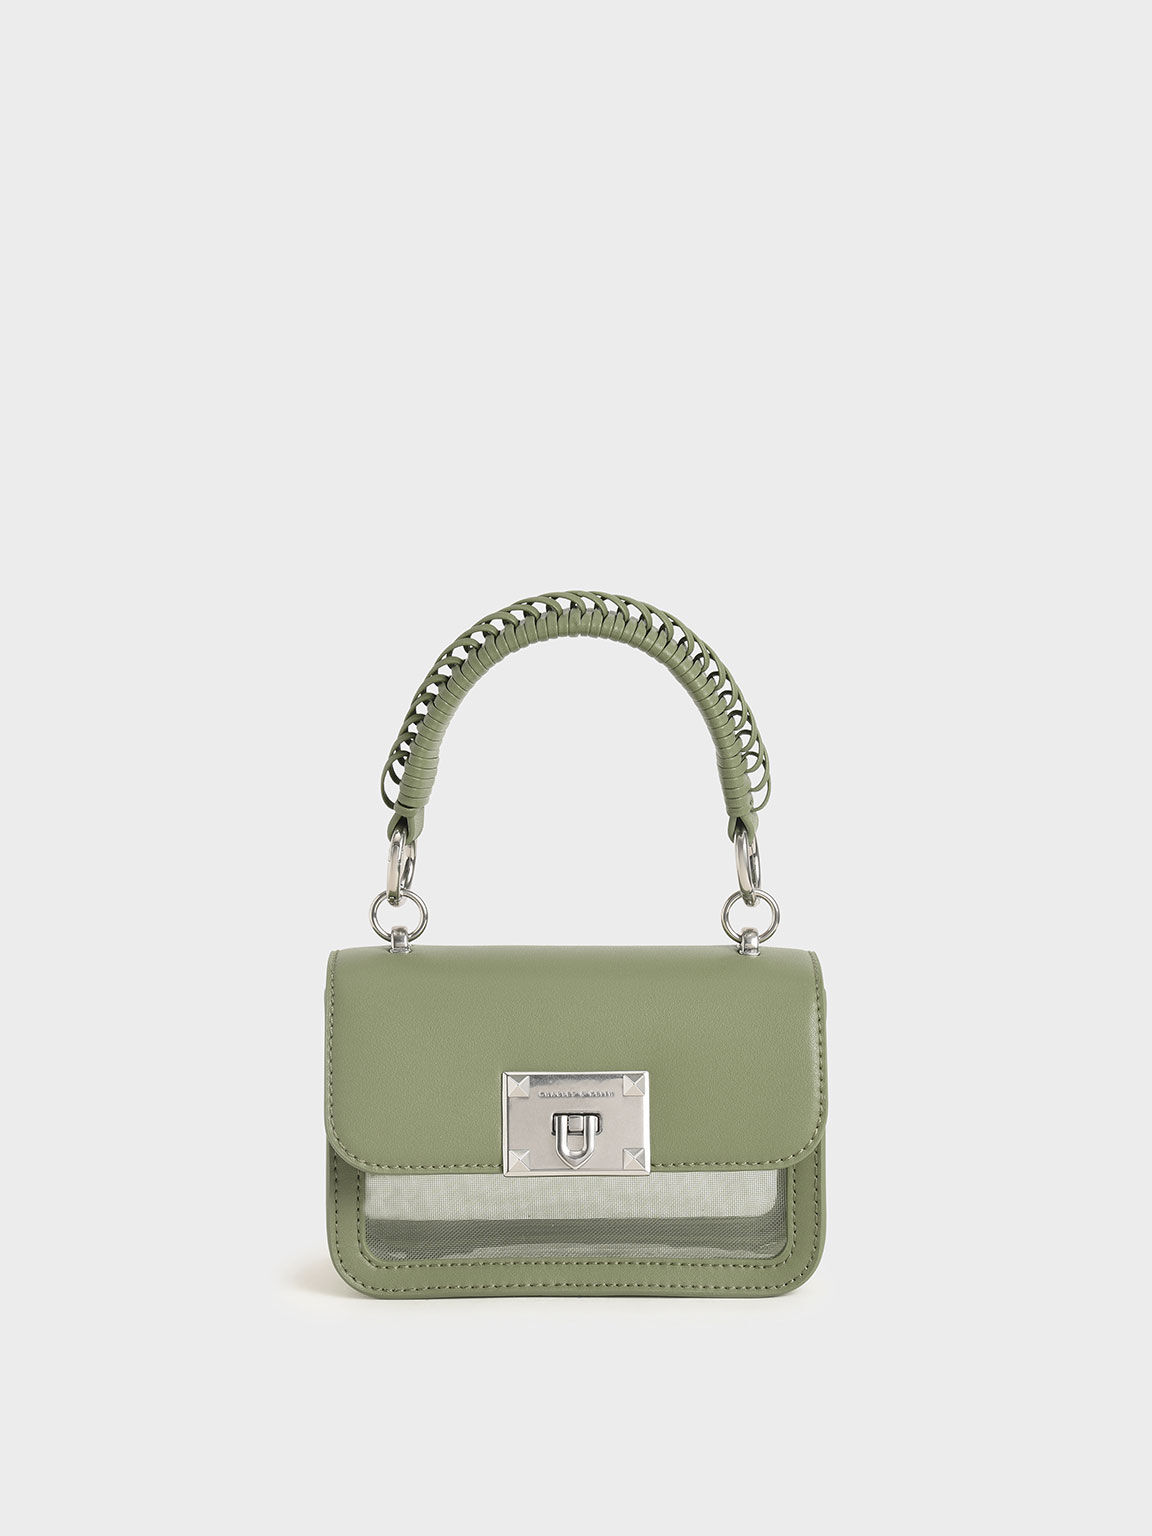 Women's Handbags | Exclusive Styles | CHARLES & KEITH SG